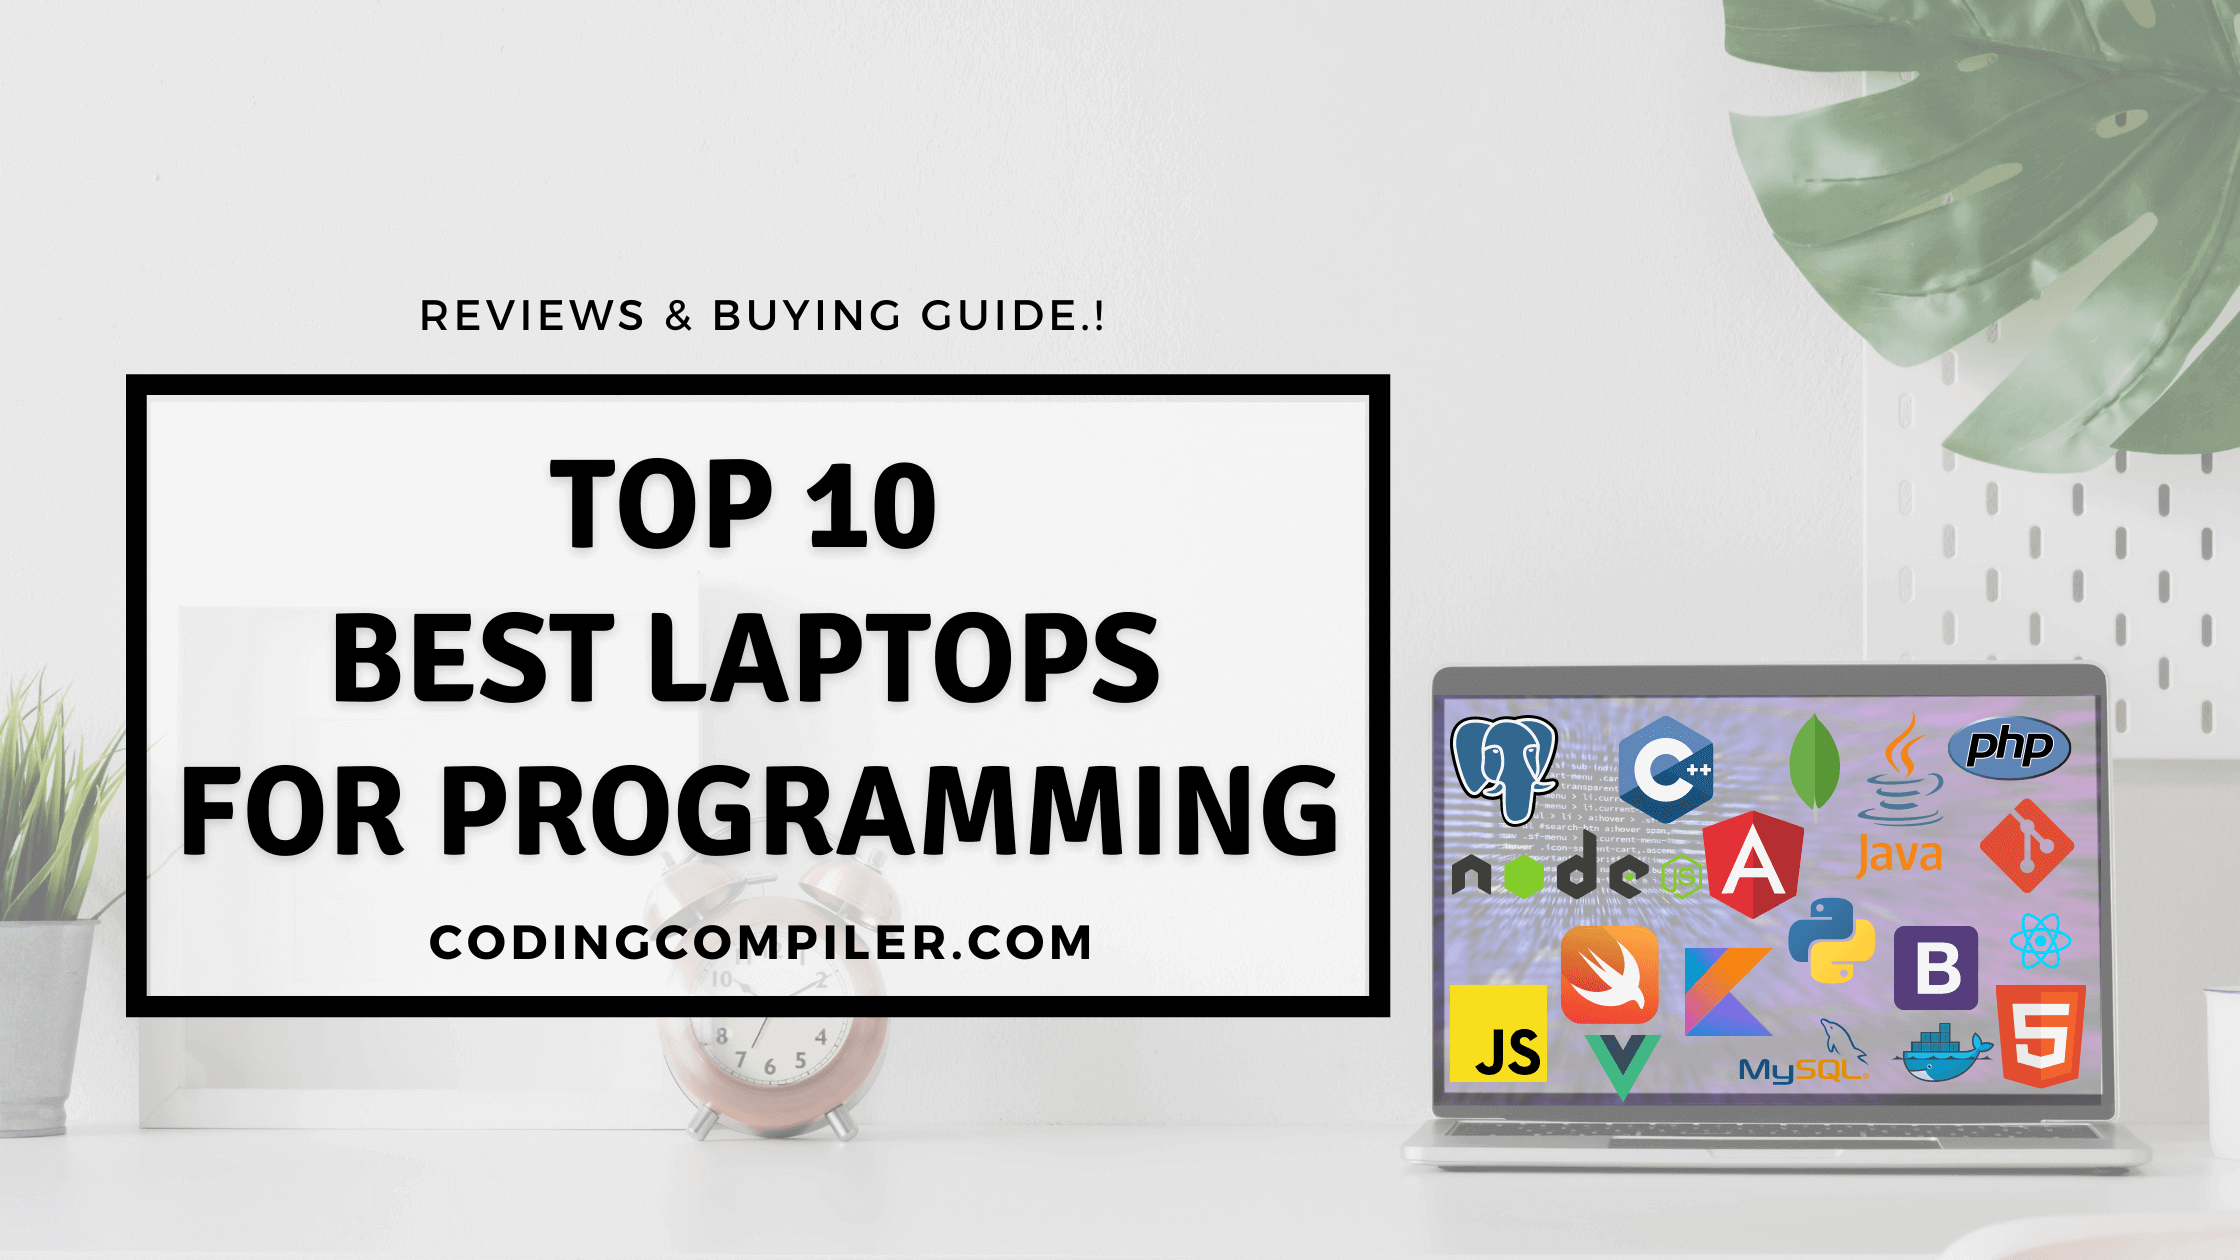 Top 10 Best Laptops For Programming In India.